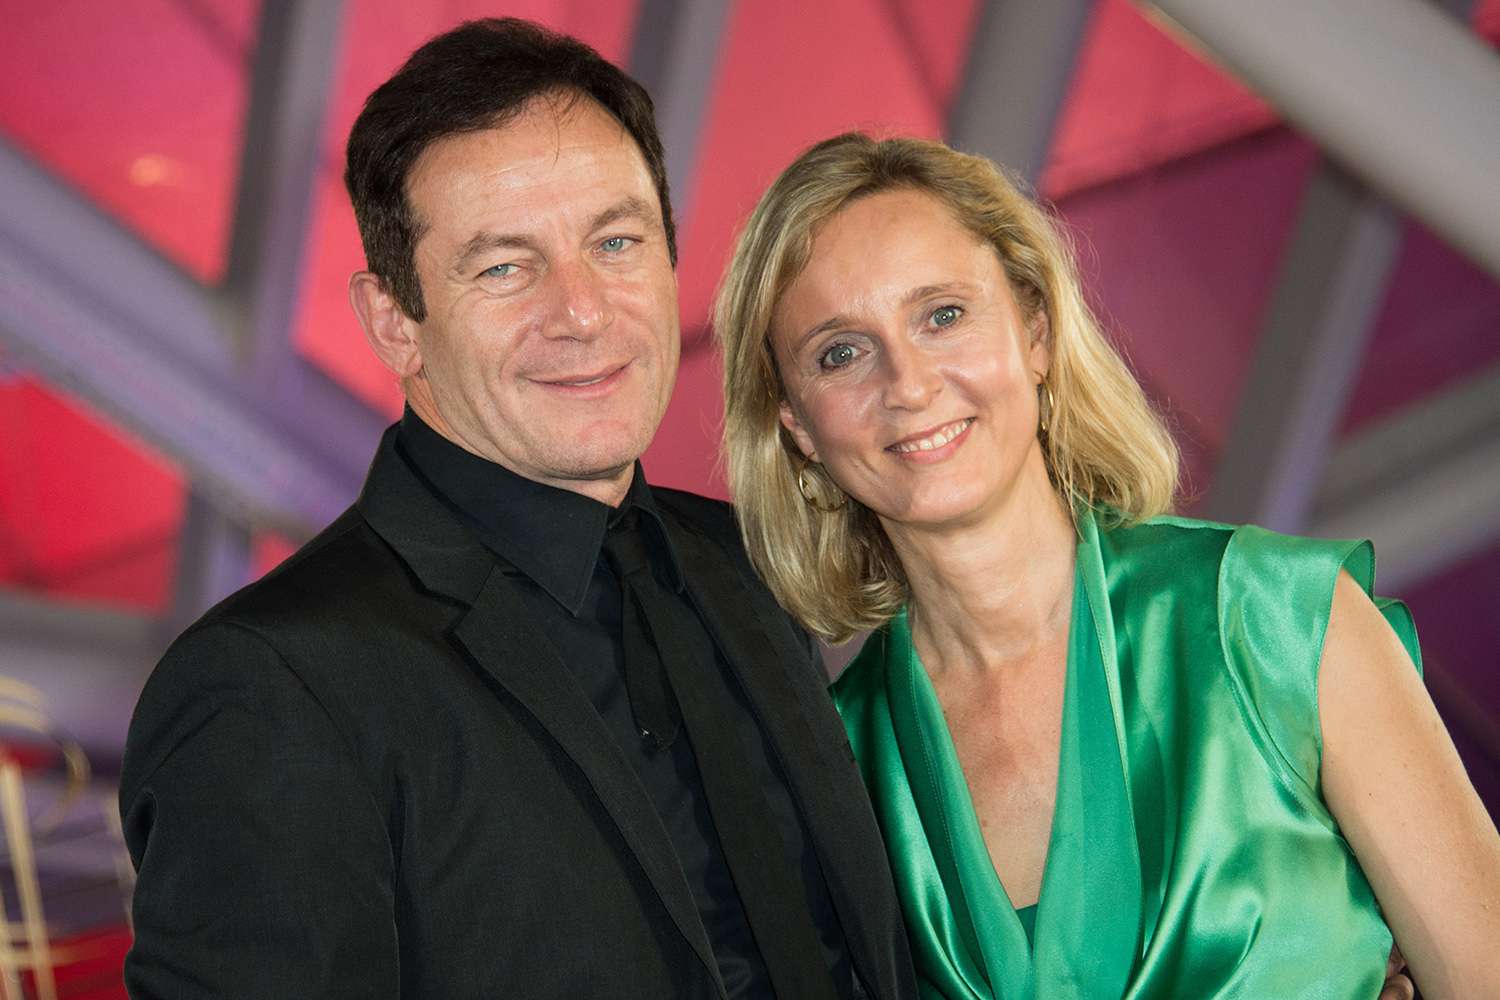 MARRAKECH, MOROCCO - DECEMBER 03: Jason Isaacs and his wife Emma Hewitt attend the 16th Marrakech International Film Festival on December 3, 2016 in Marrakech, Morocco. (Photo by Stephane Cardinale - Corbis/Corbis via Getty Images)